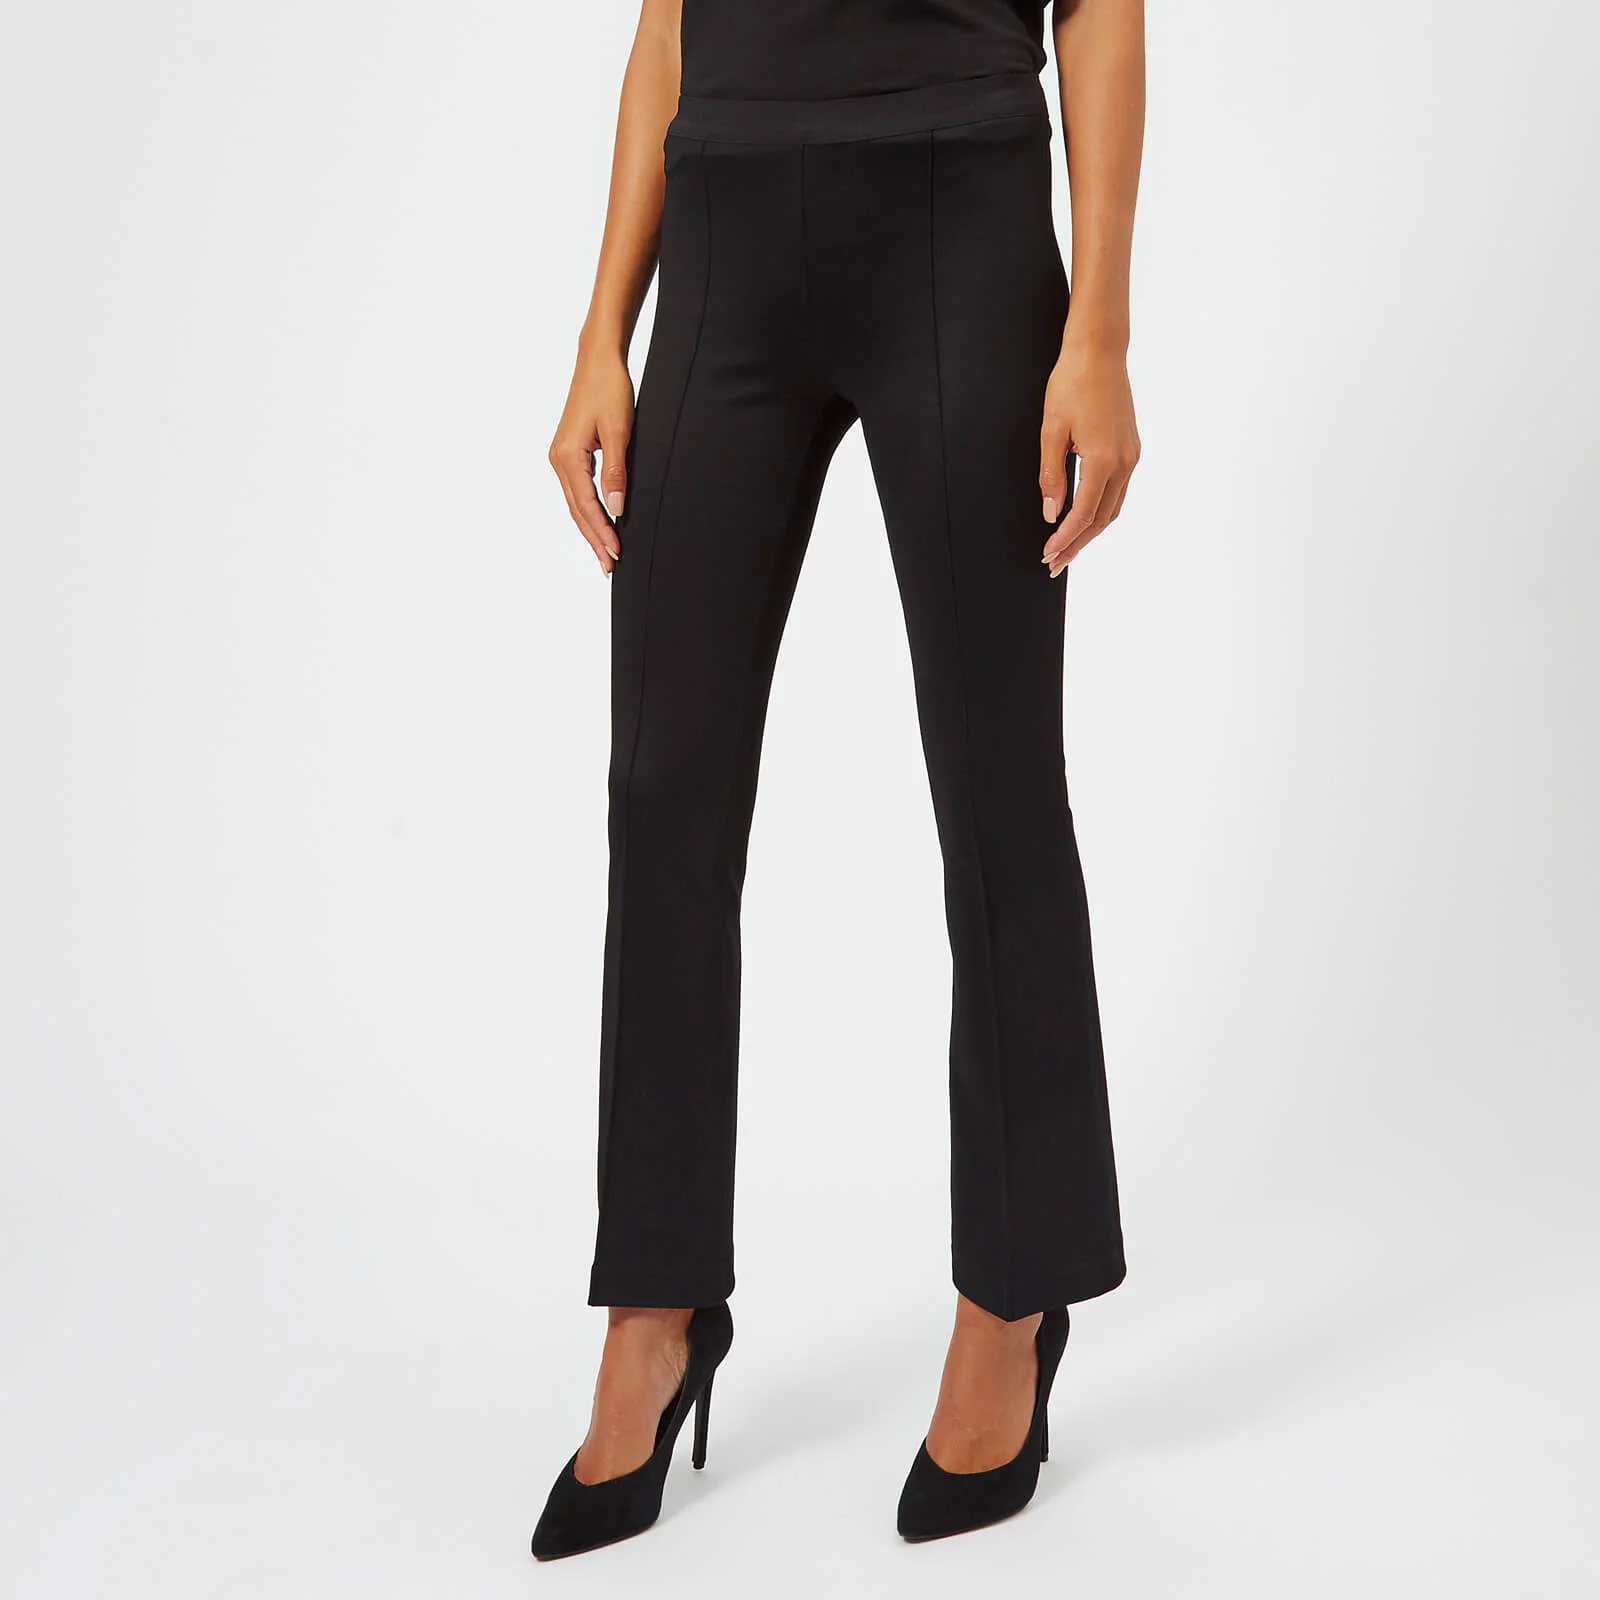 Helmut Lang Women's Cropped Flare Rib Trousers - Black Image 1